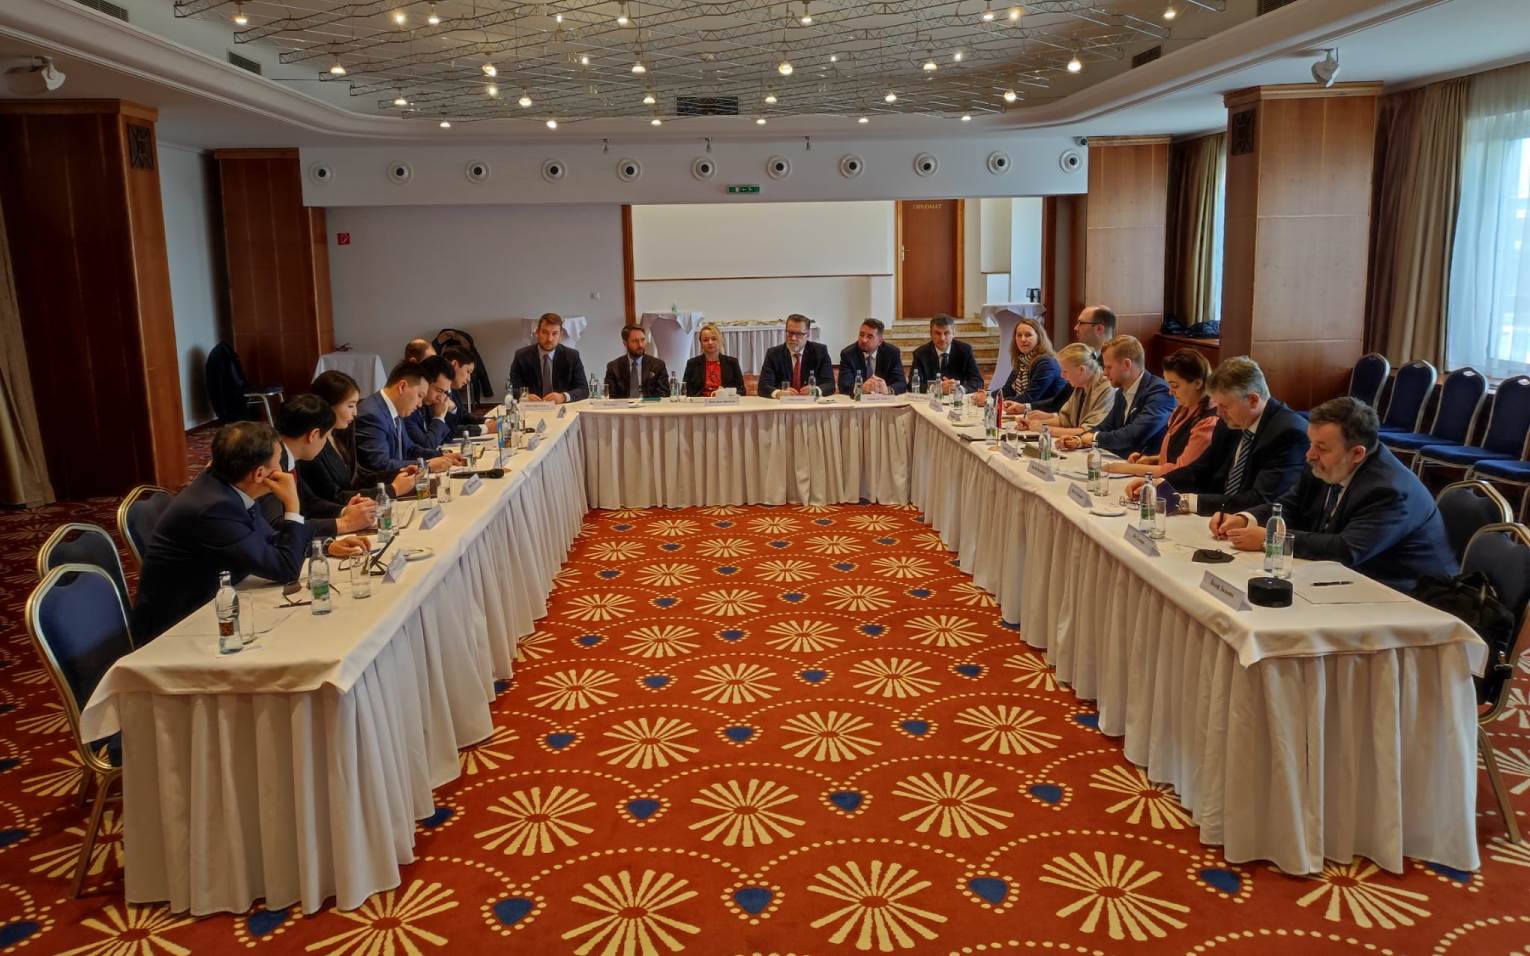 IBEC promotes economic ties between Central Europe and Central Asia